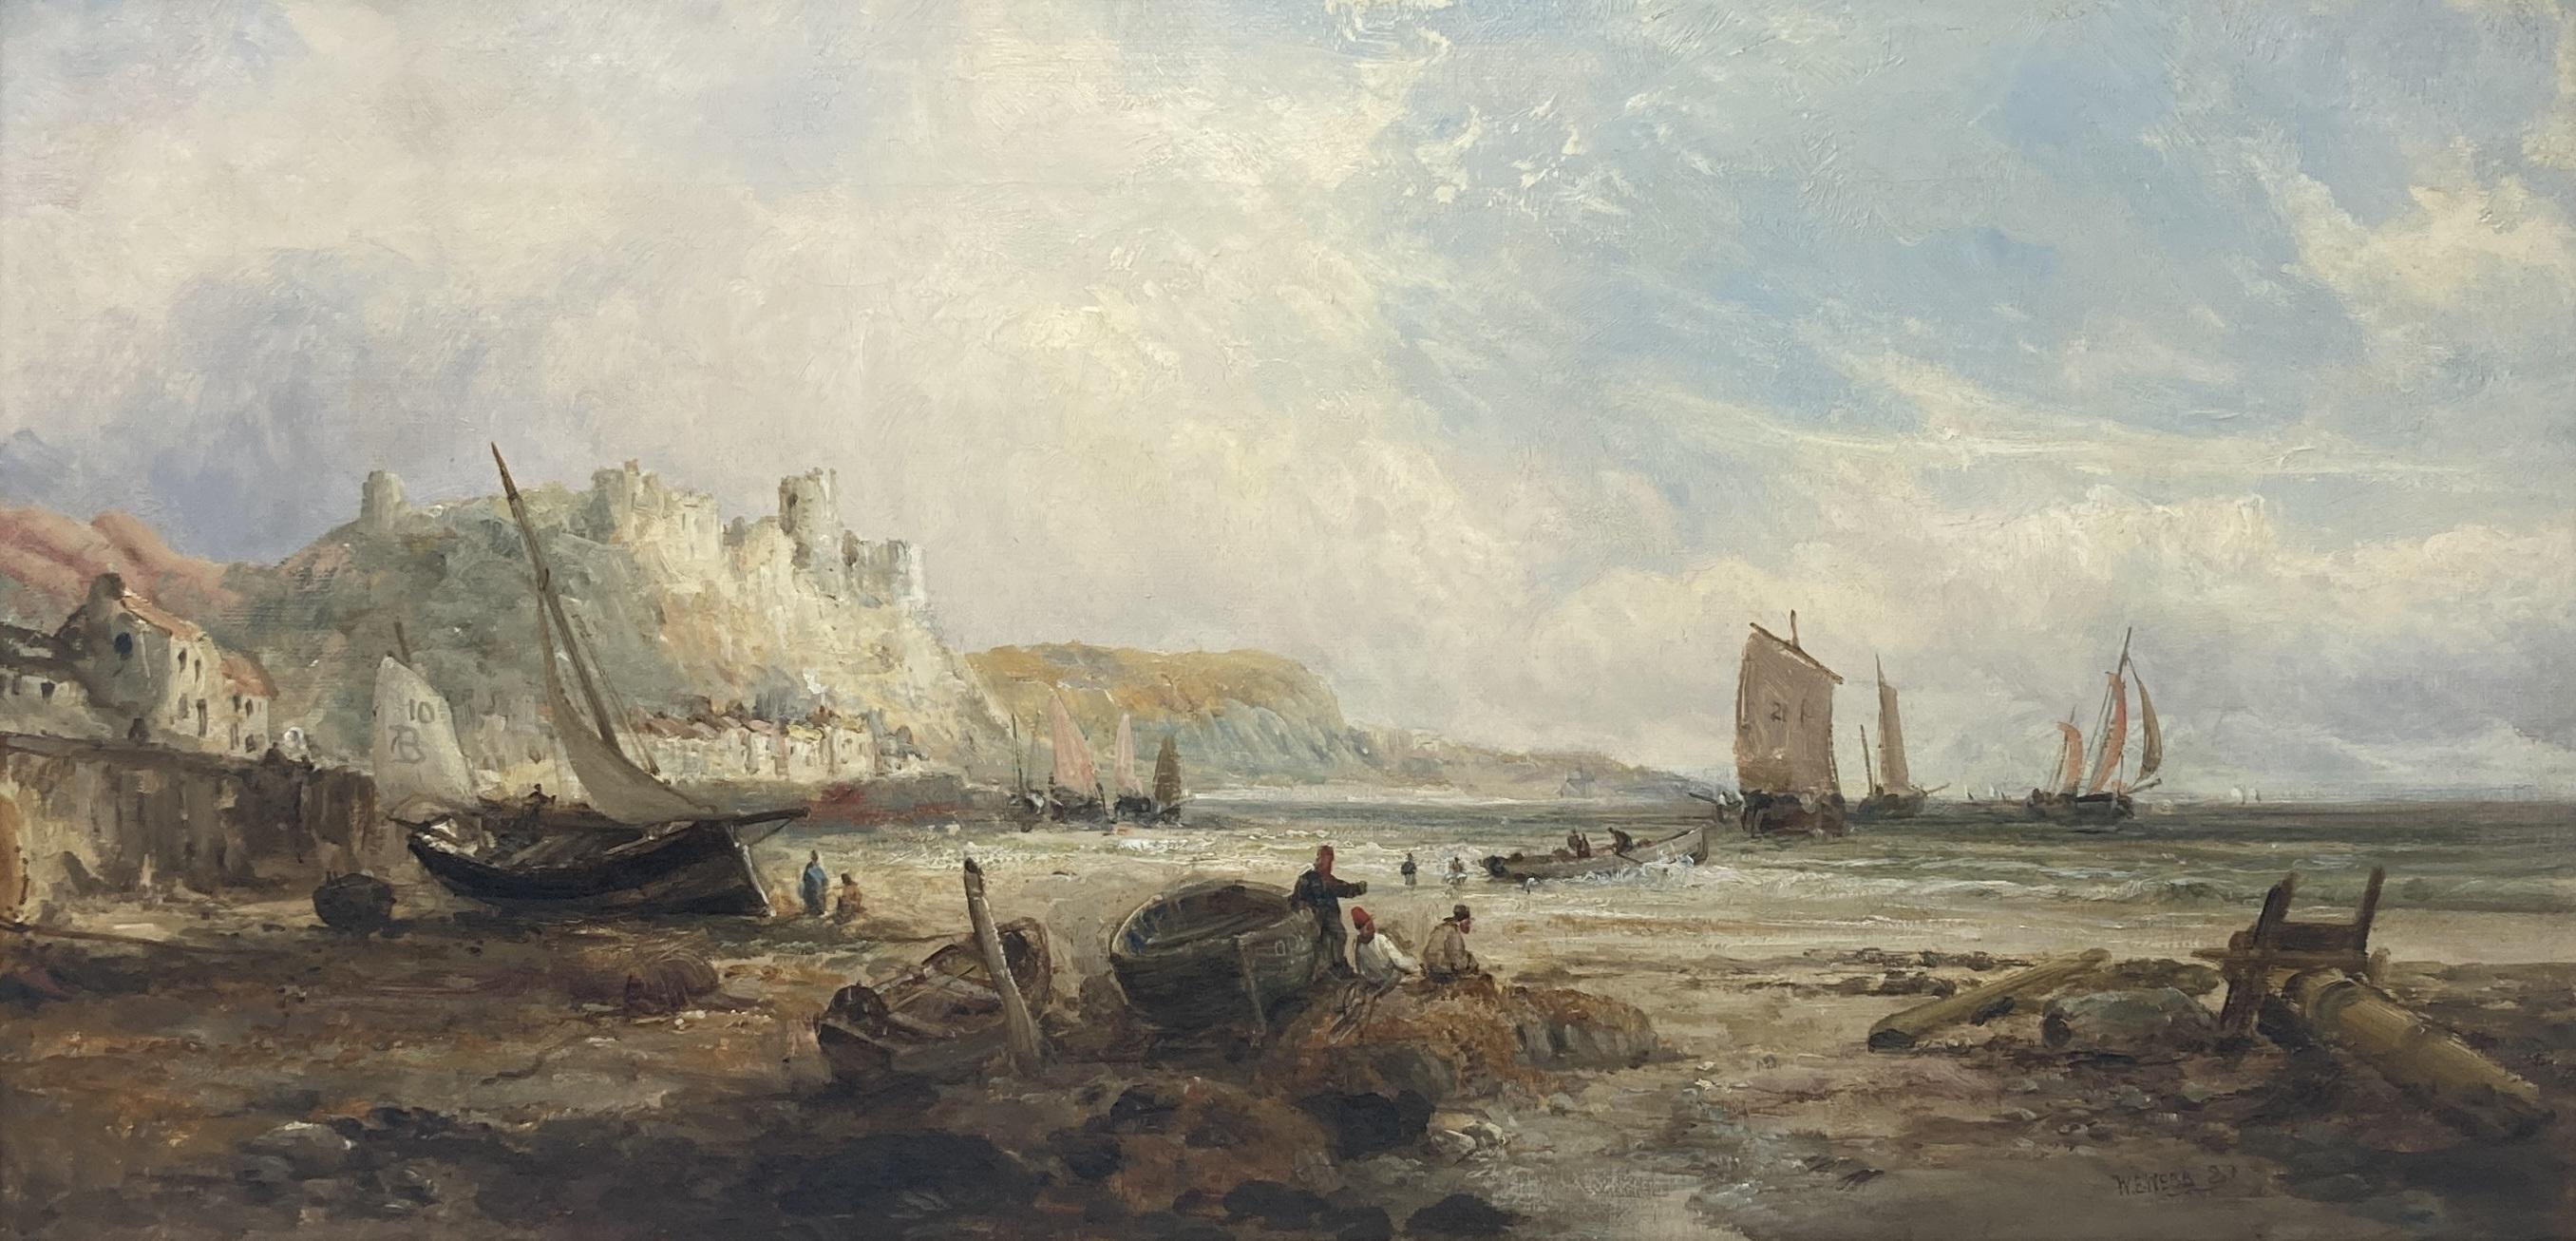 Hastings Castle from the beach  oil William  Edward Webb
A fine 19th century oil on canvas painting depicting Hastings Castle from the beach with fishermen and boats
housed in a git frame .Signed and dated W.E.WEBB 89 lower right
The size of the